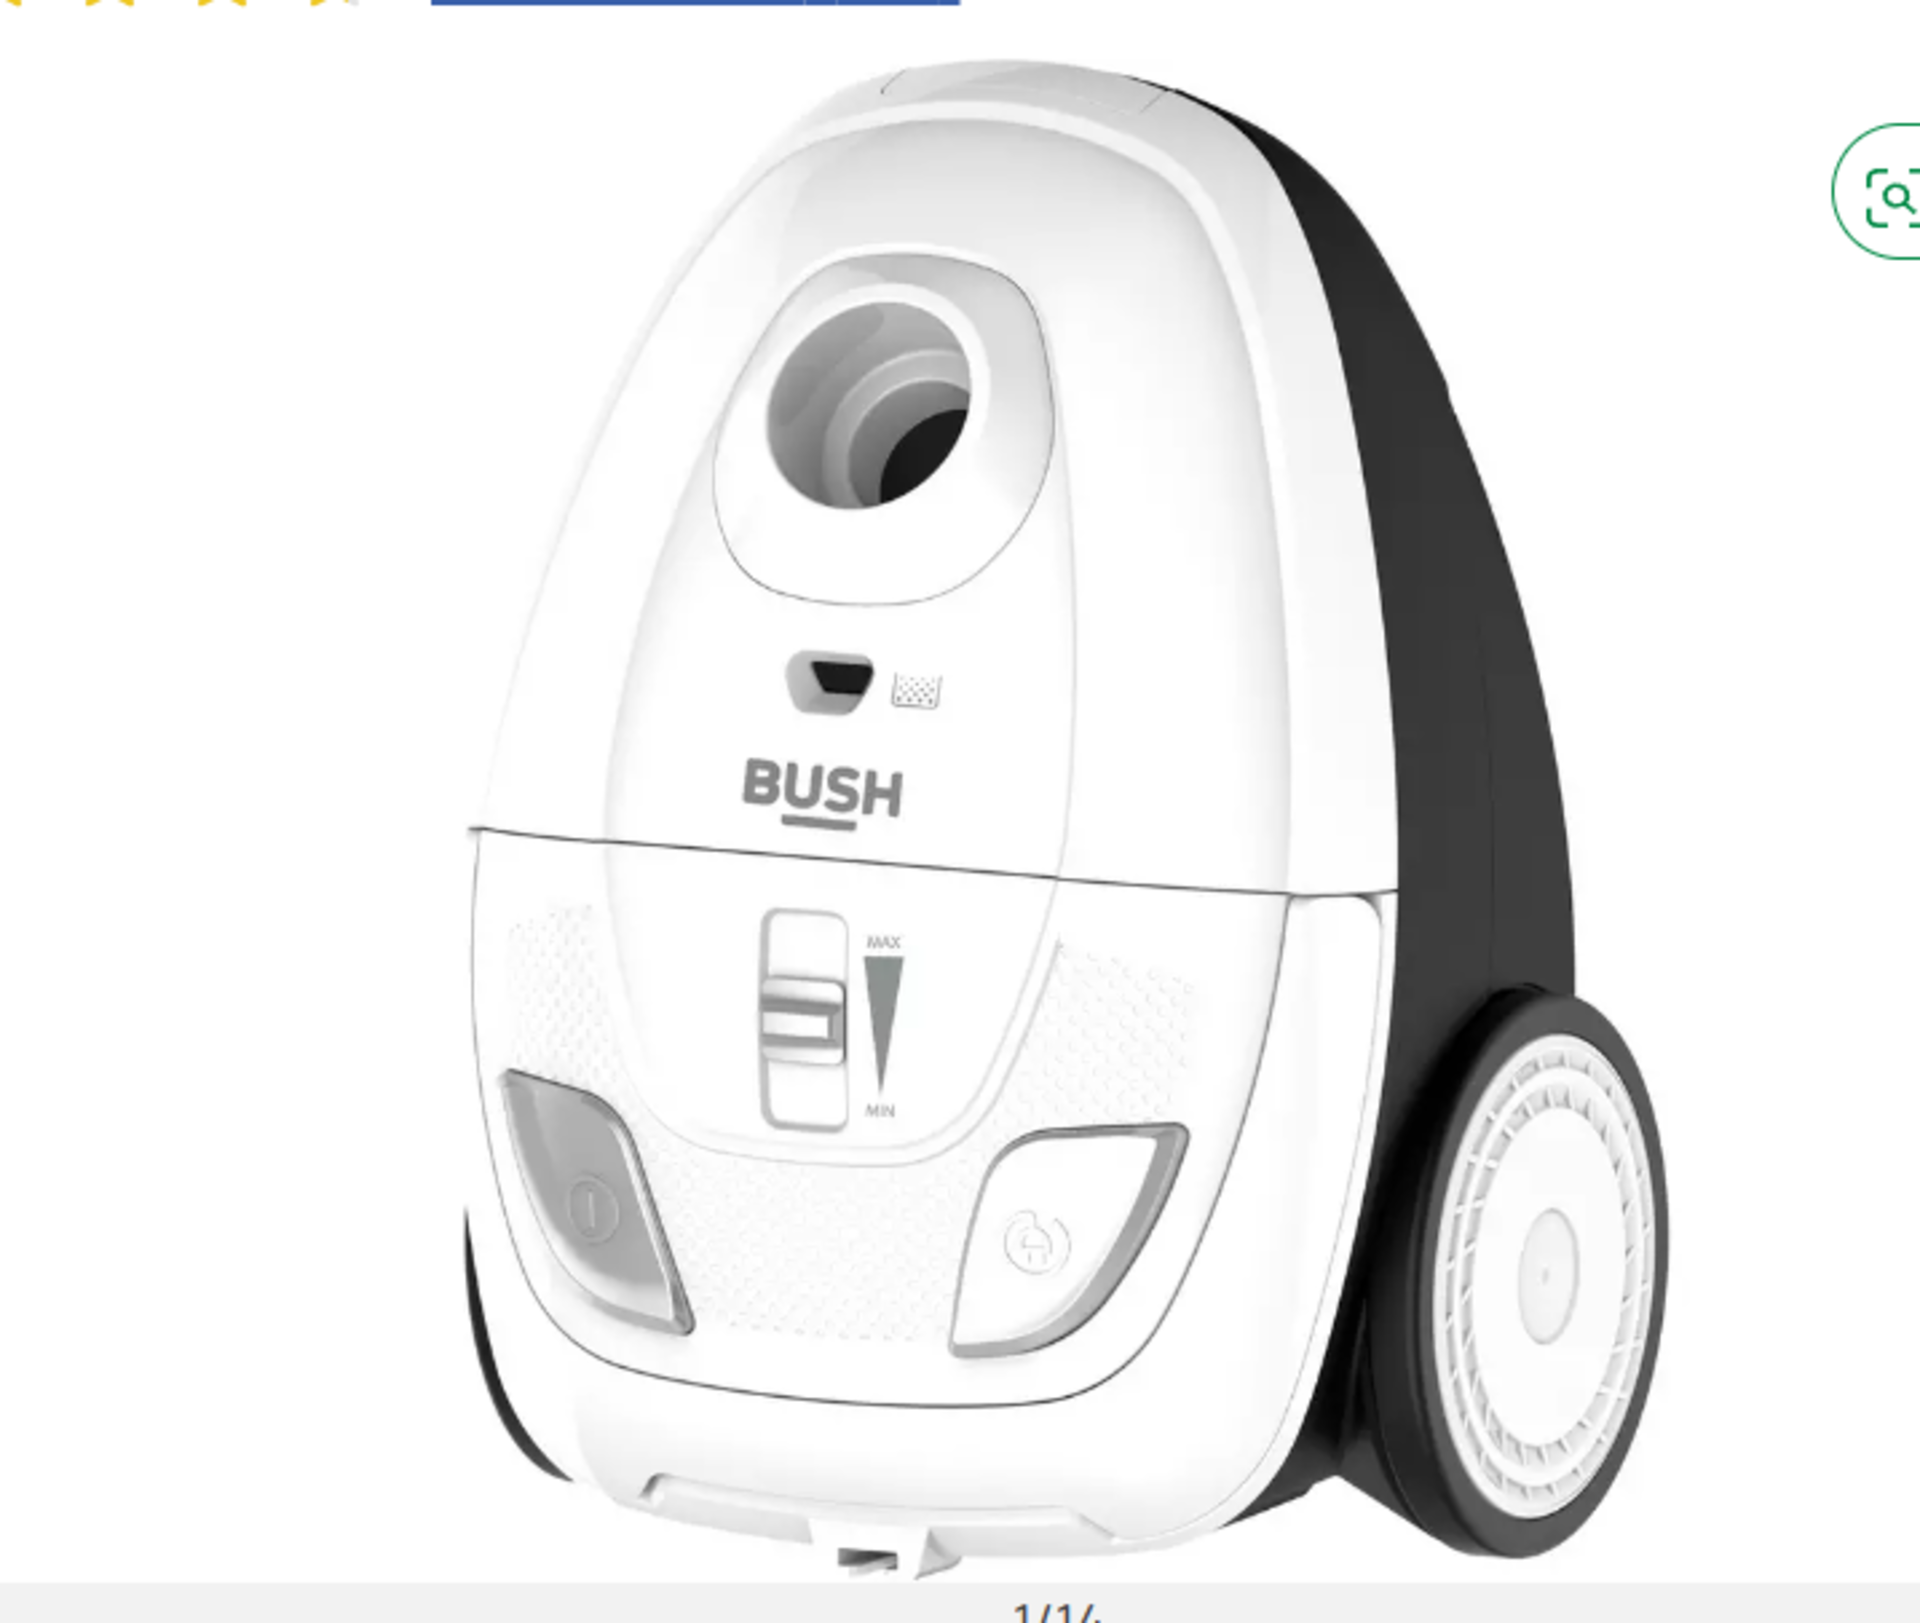 Bush Corded Bagged Cylinder Vacuum Cleaner. RRP £80.00. - EBR *BOXED*. Deal with dust and pet dander